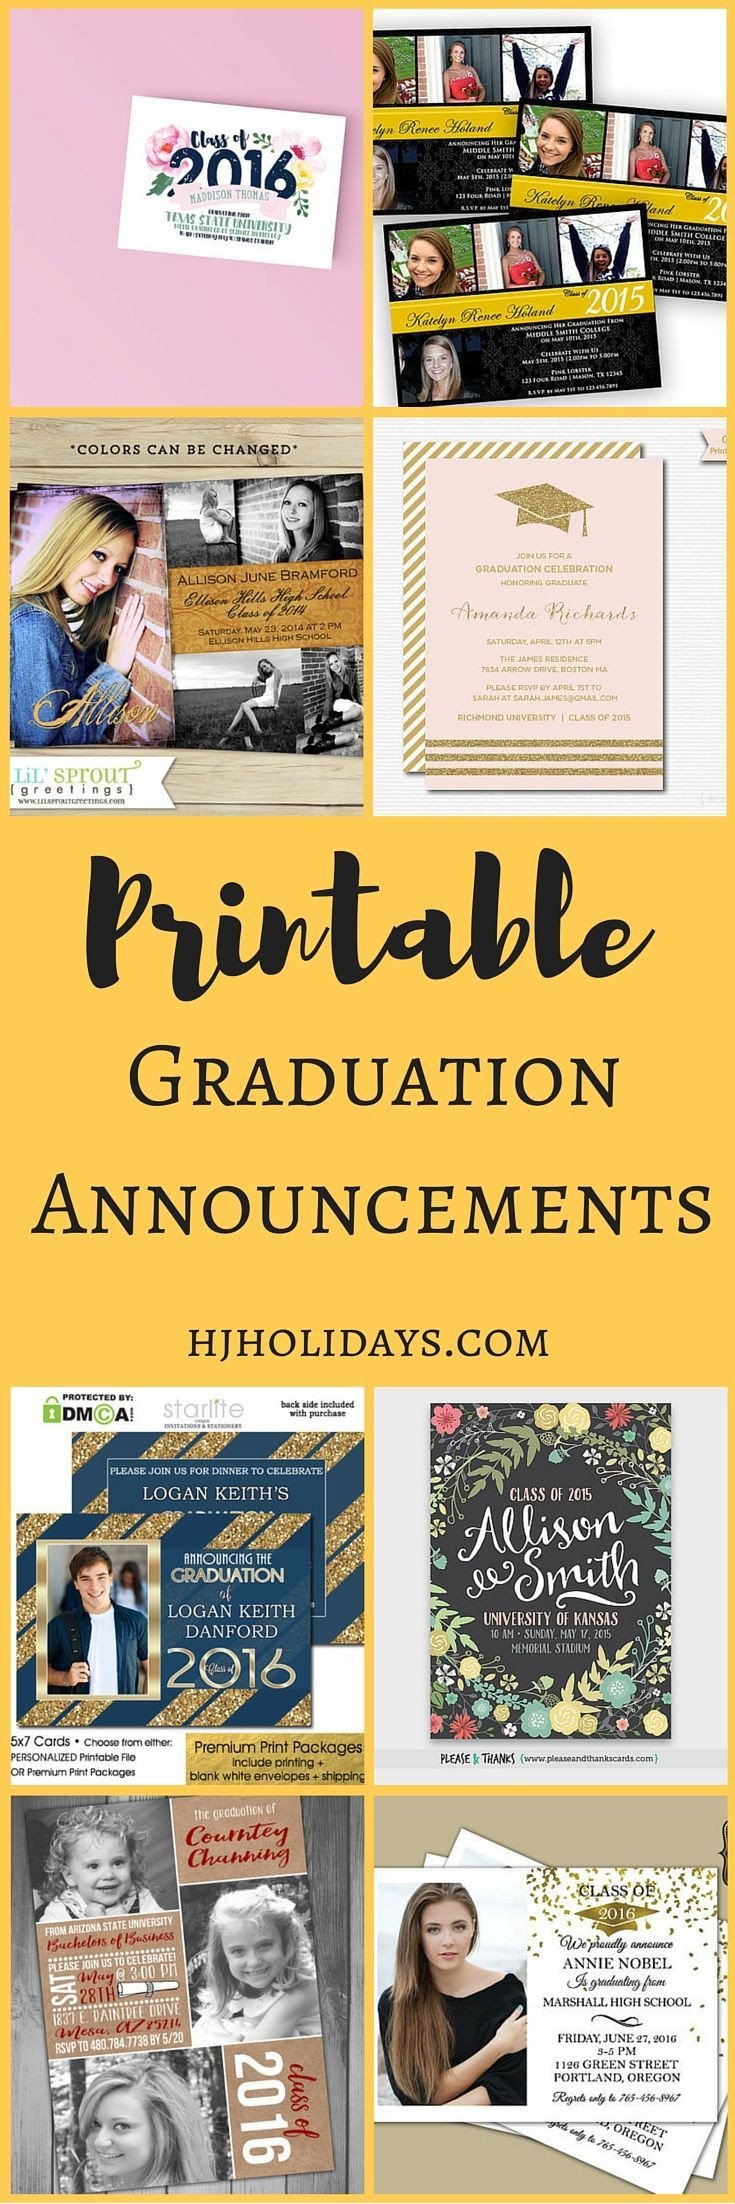 Printable Graduation Announcements and Cards